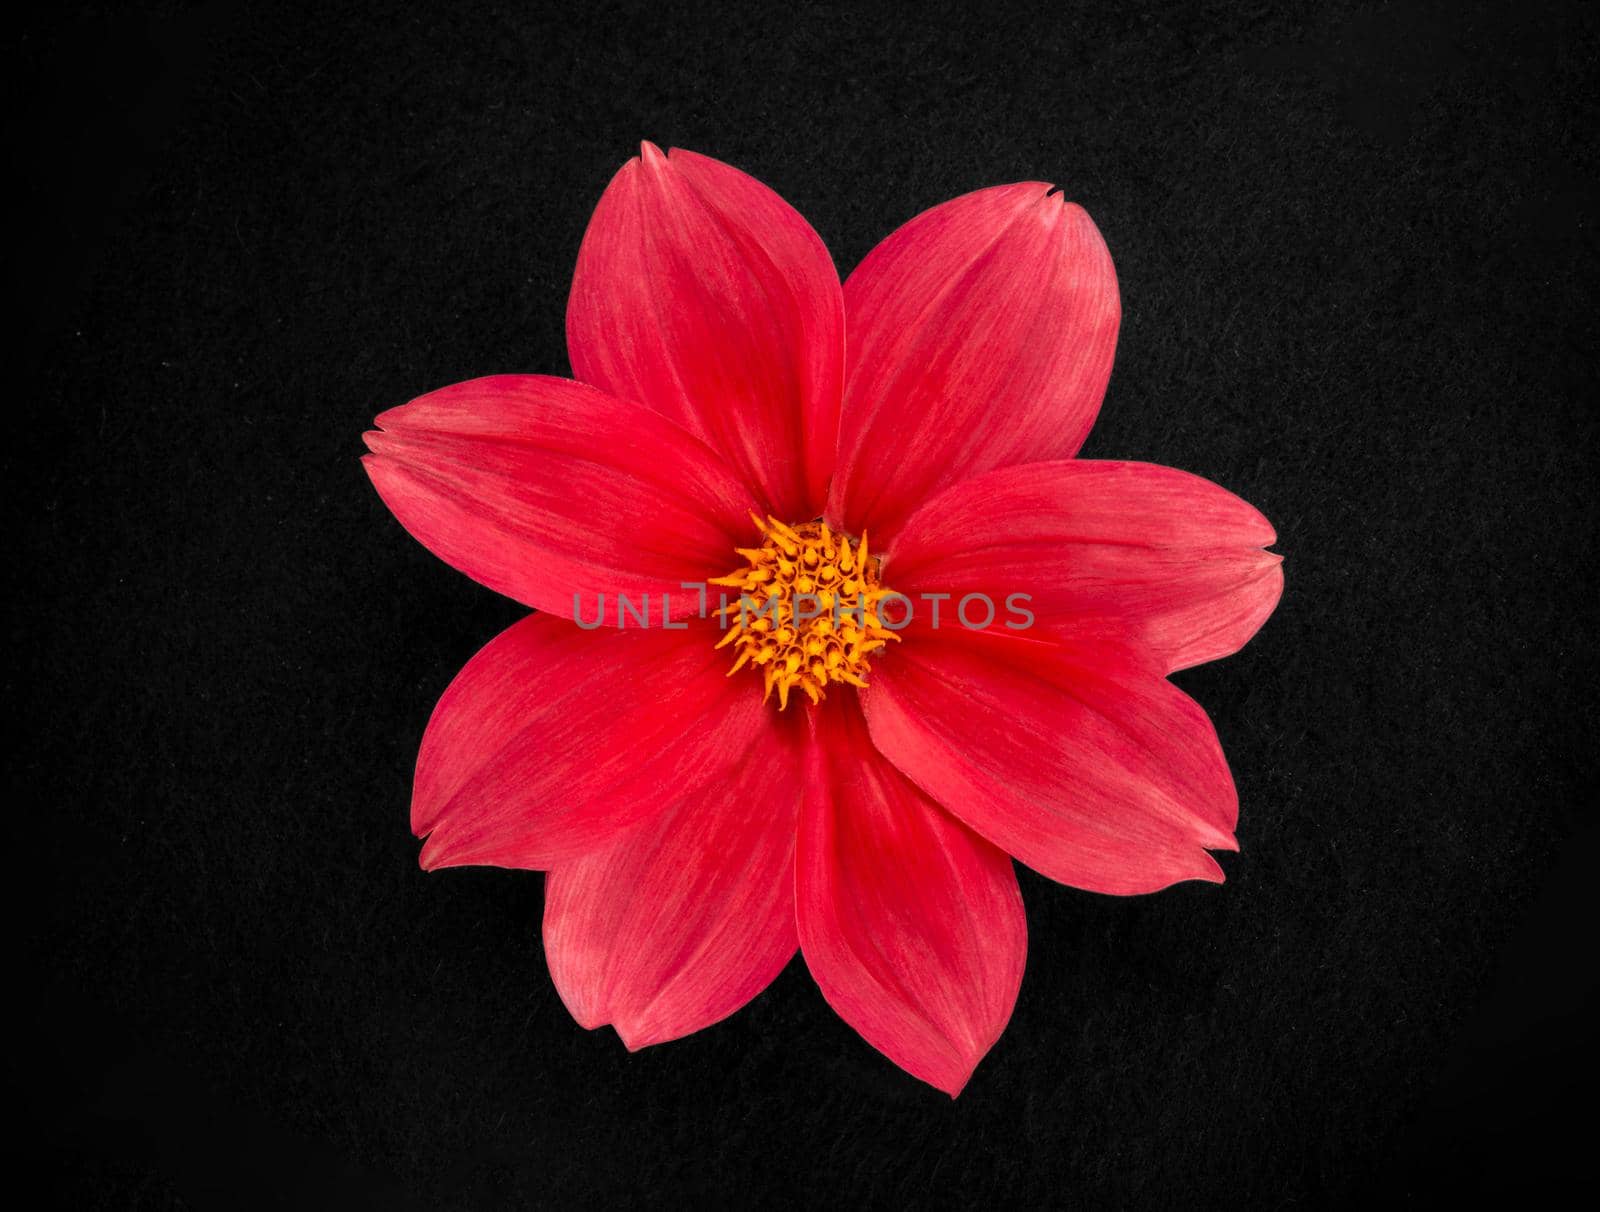 Delicate flower on a black background. On a dark background.